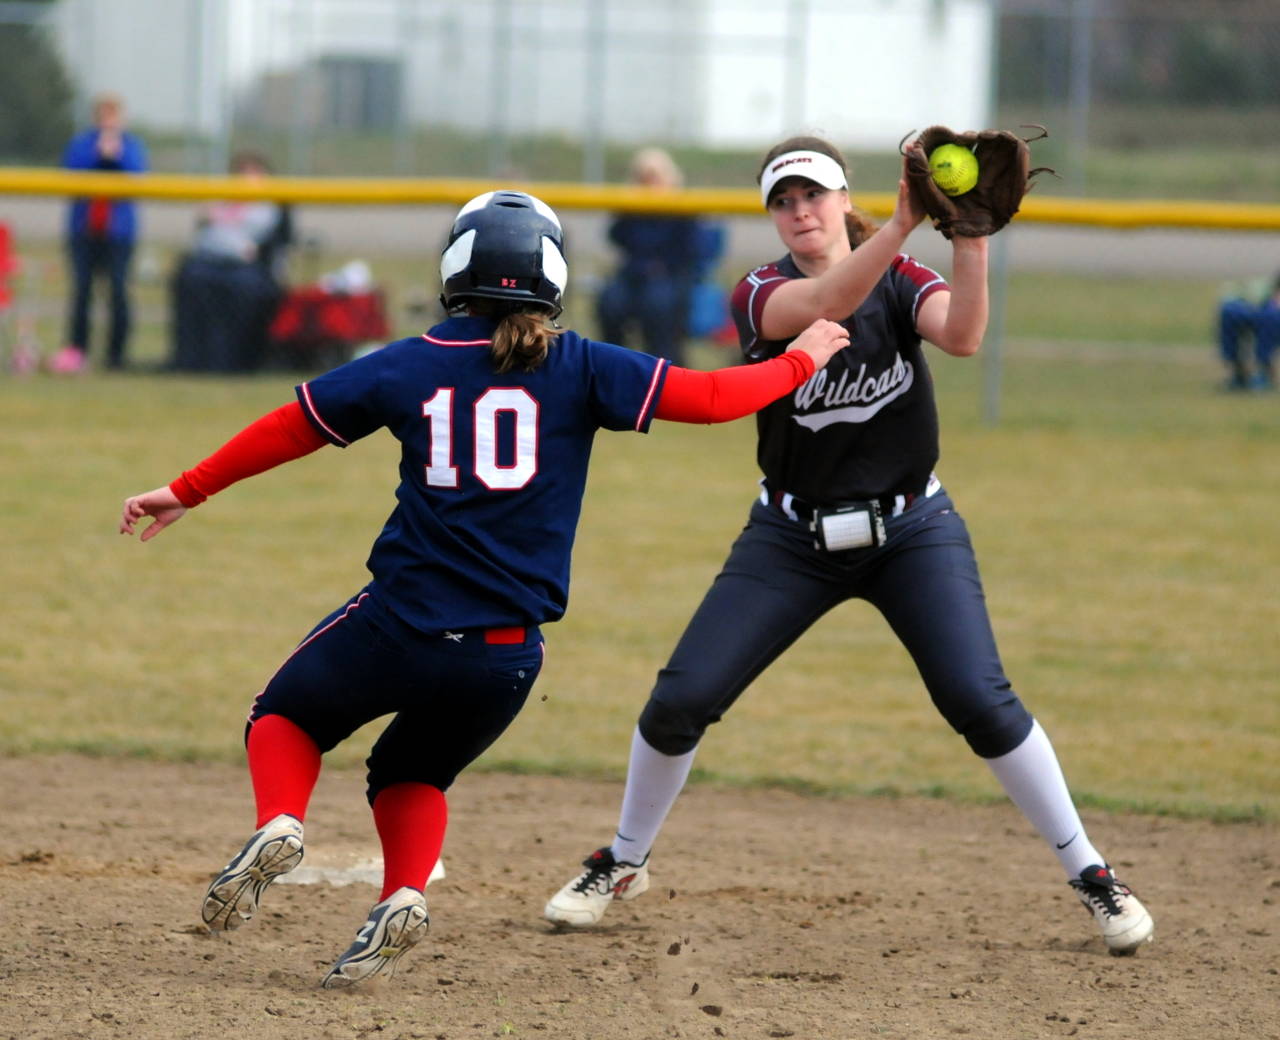 Ocosta infielder Kaylee Barnum, right, looks to tag PWV’s Morgan Coady during a doubleheader on Saturday at Pe Ell High School. (Ryan Sparks | Grays Harbor News Group)